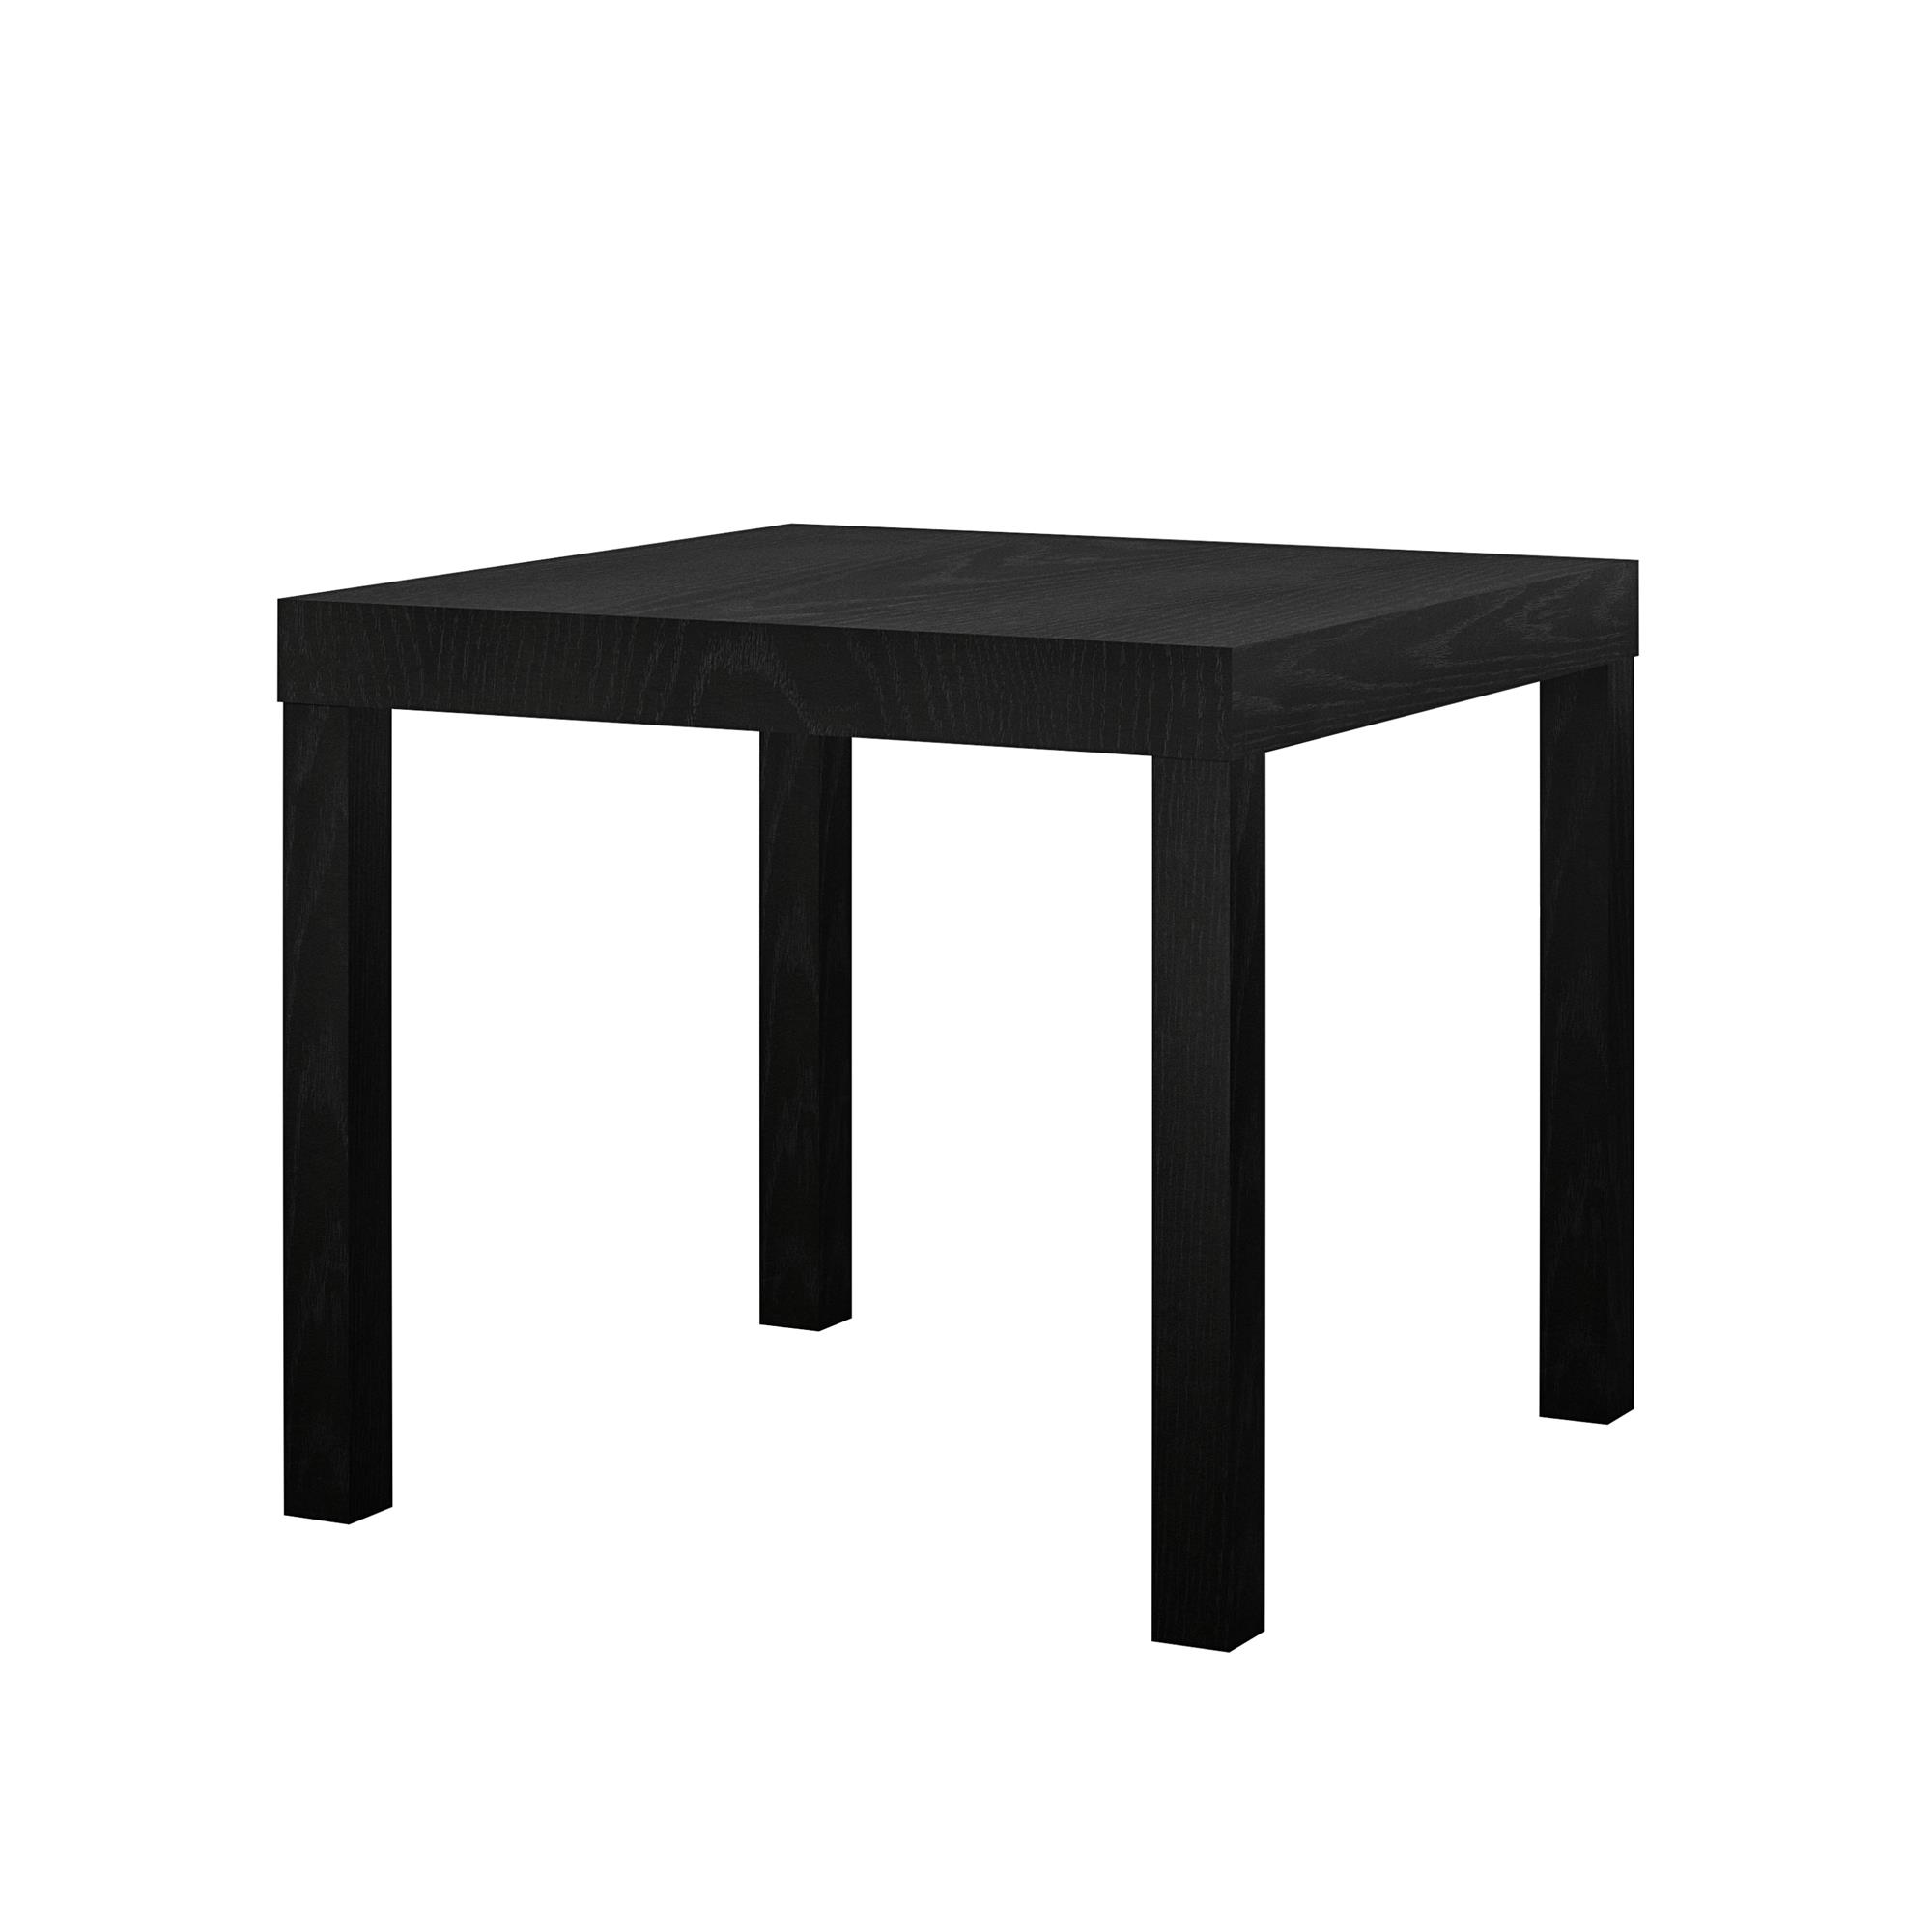 Mainstays Parson's End Table, Black - image 5 of 8